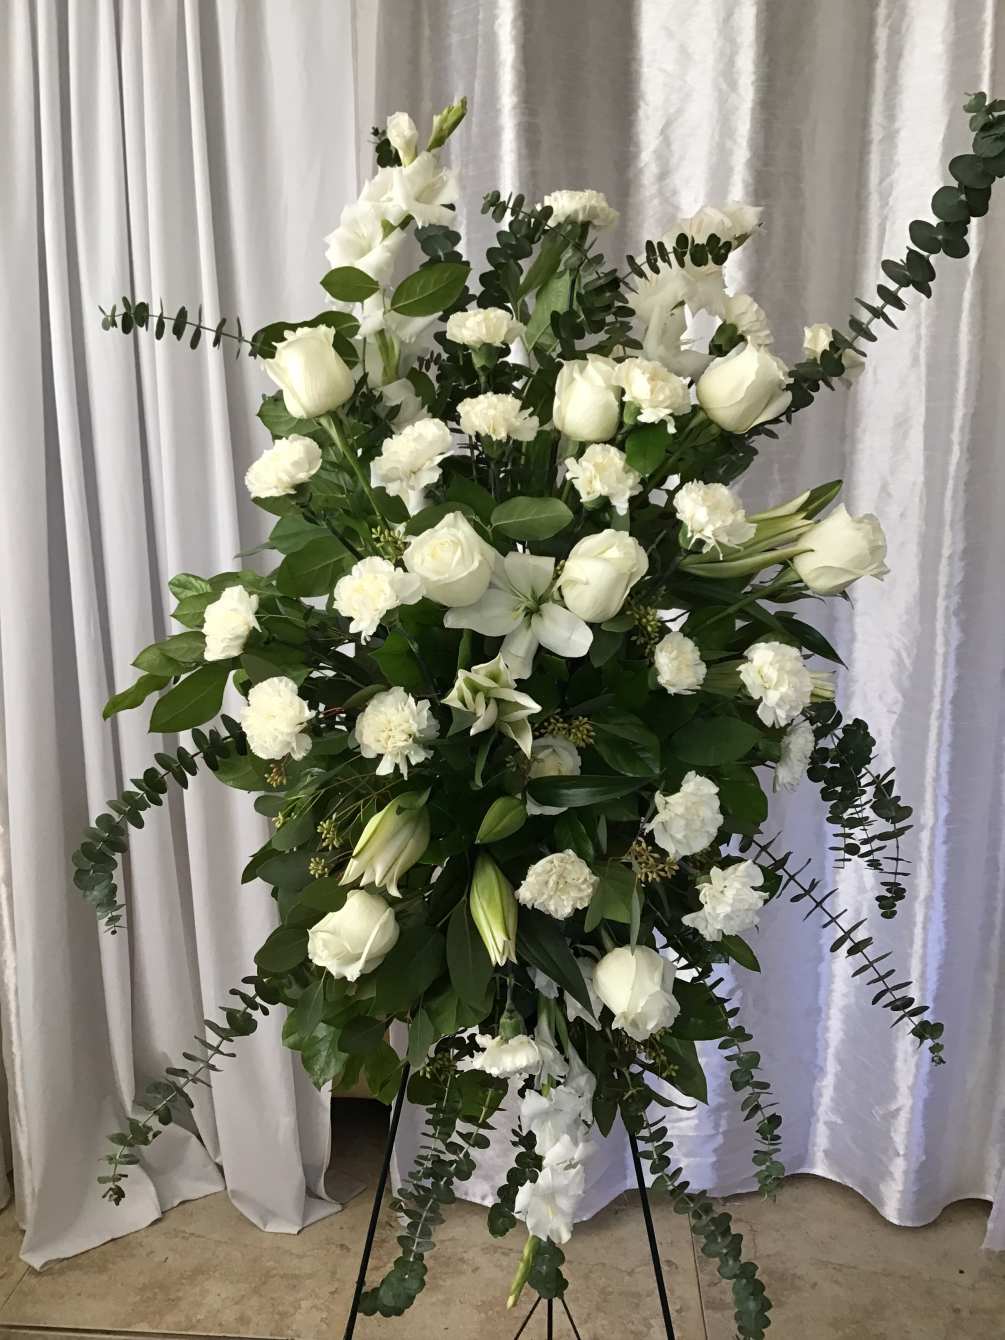 Beautiful white roses/lilies, carnations and greenery.  